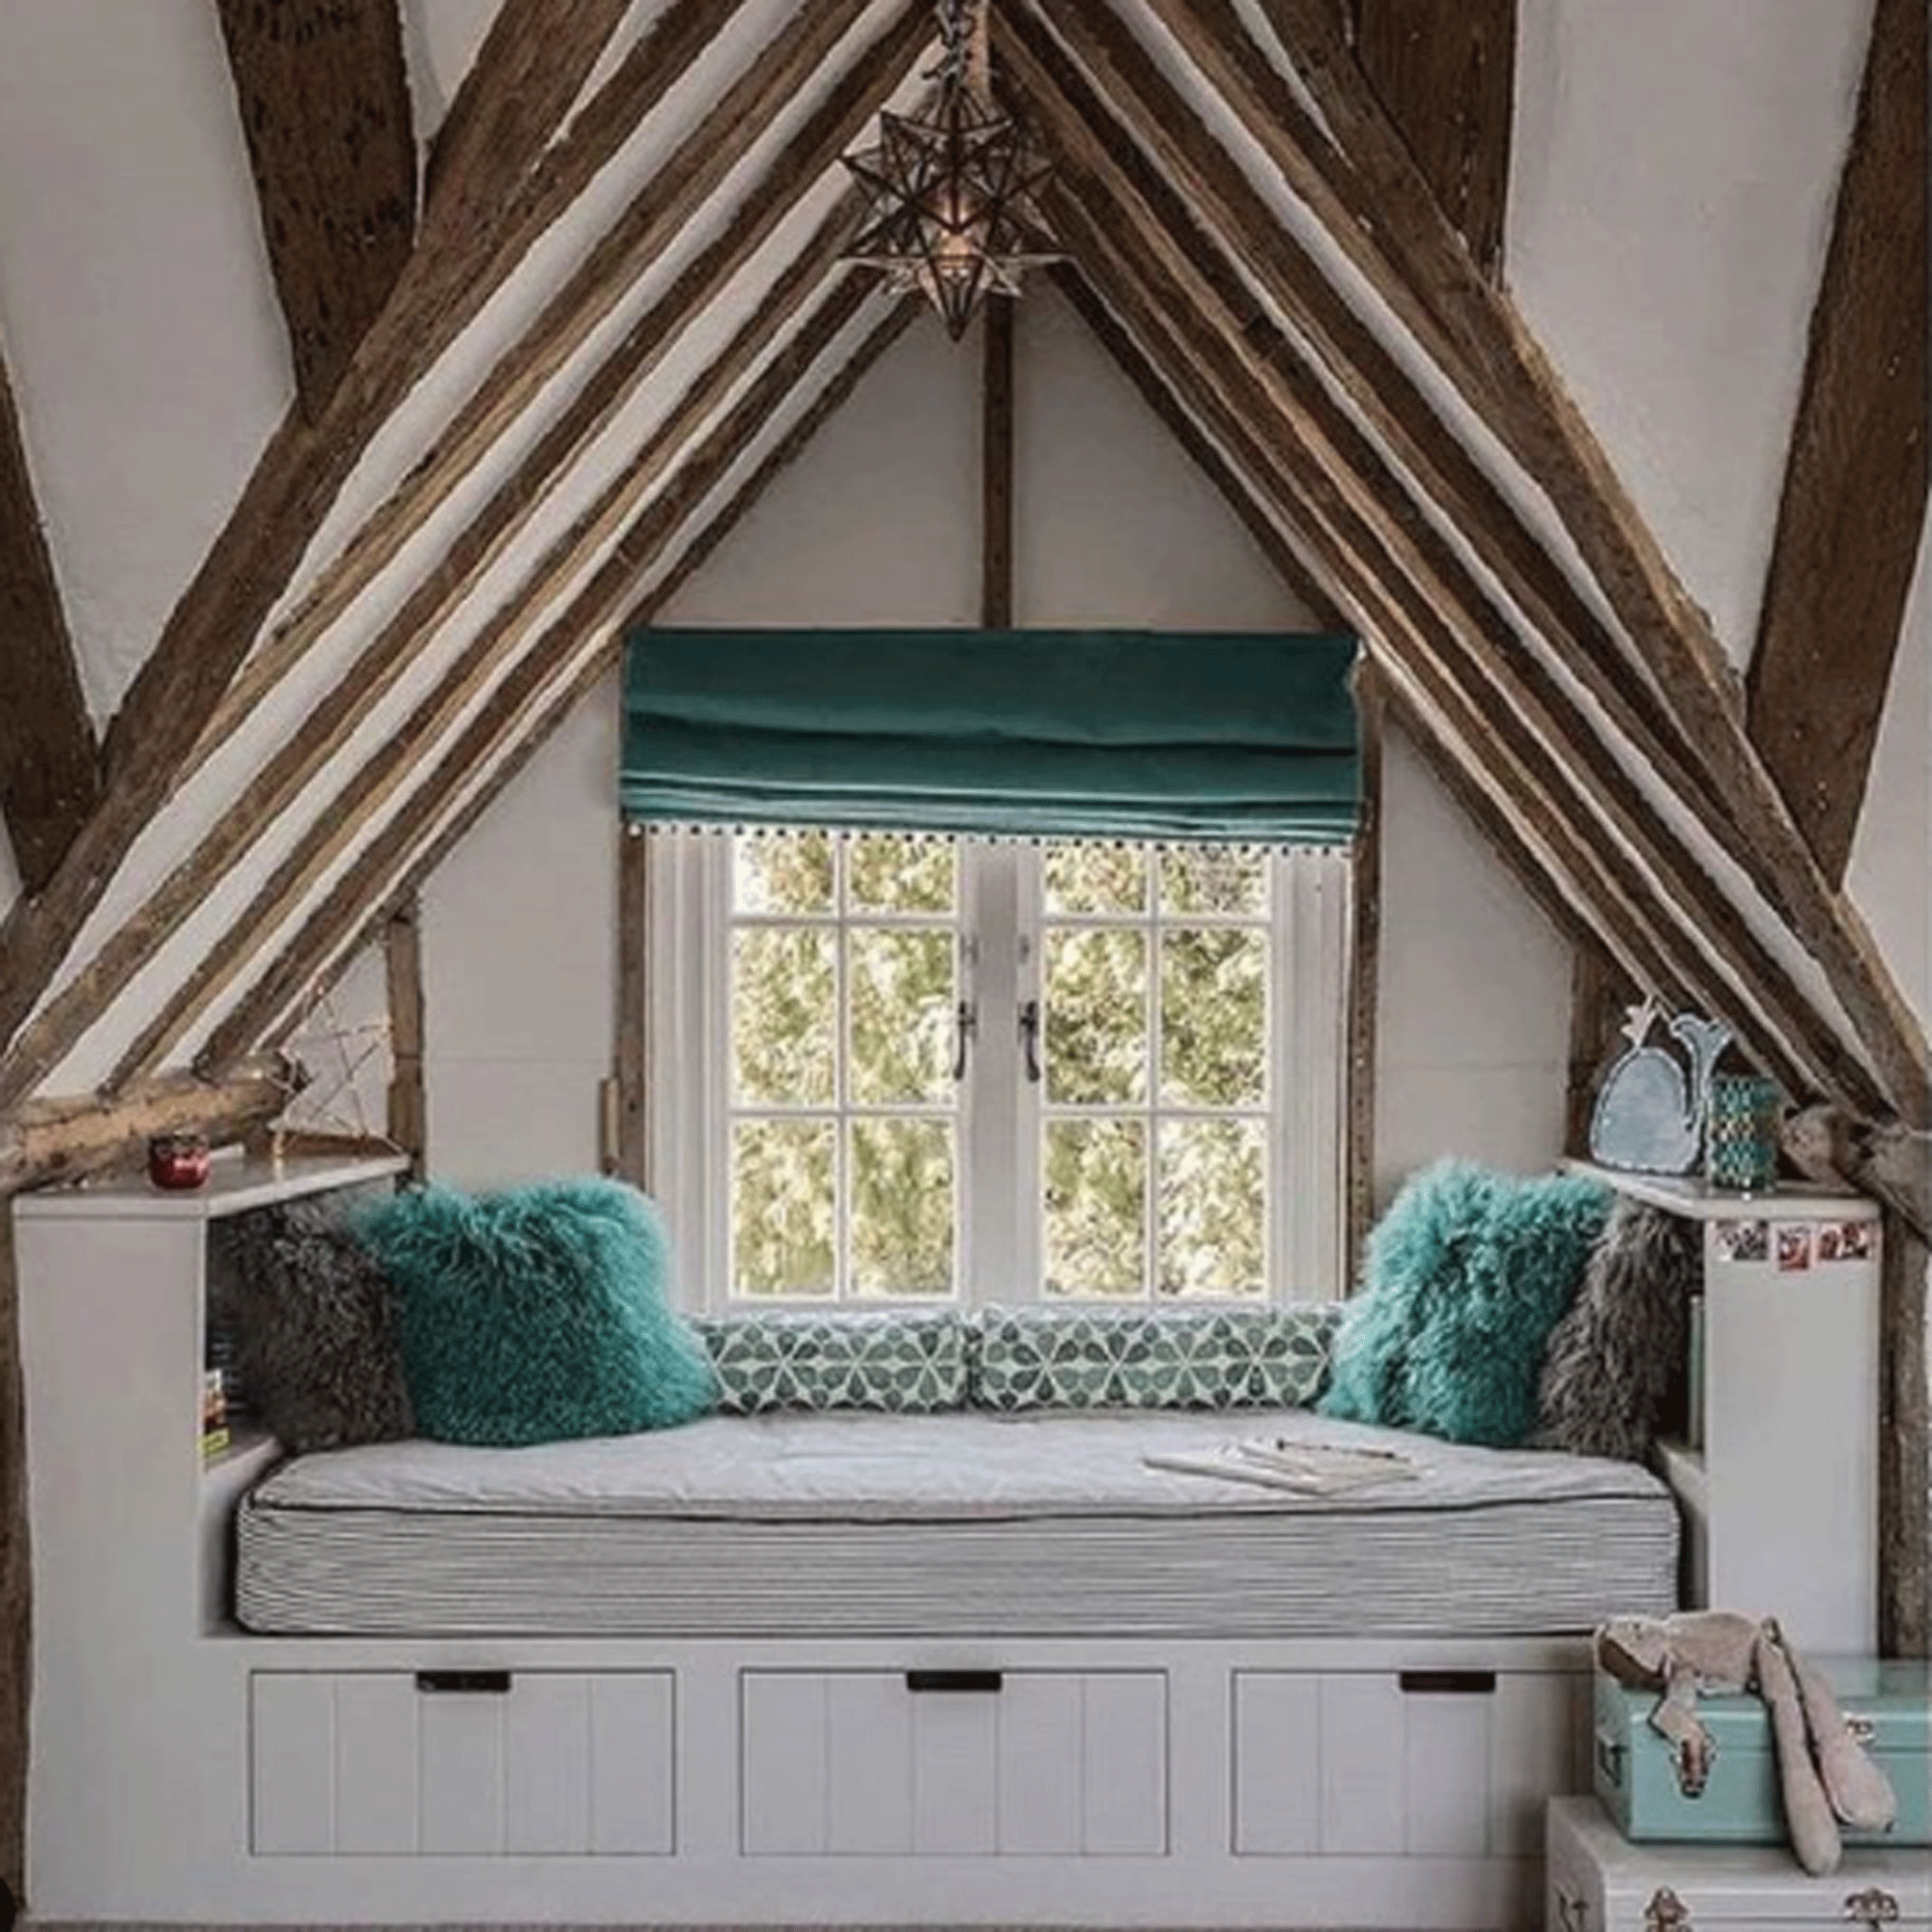 Neutral attic bedroom with teal accessories